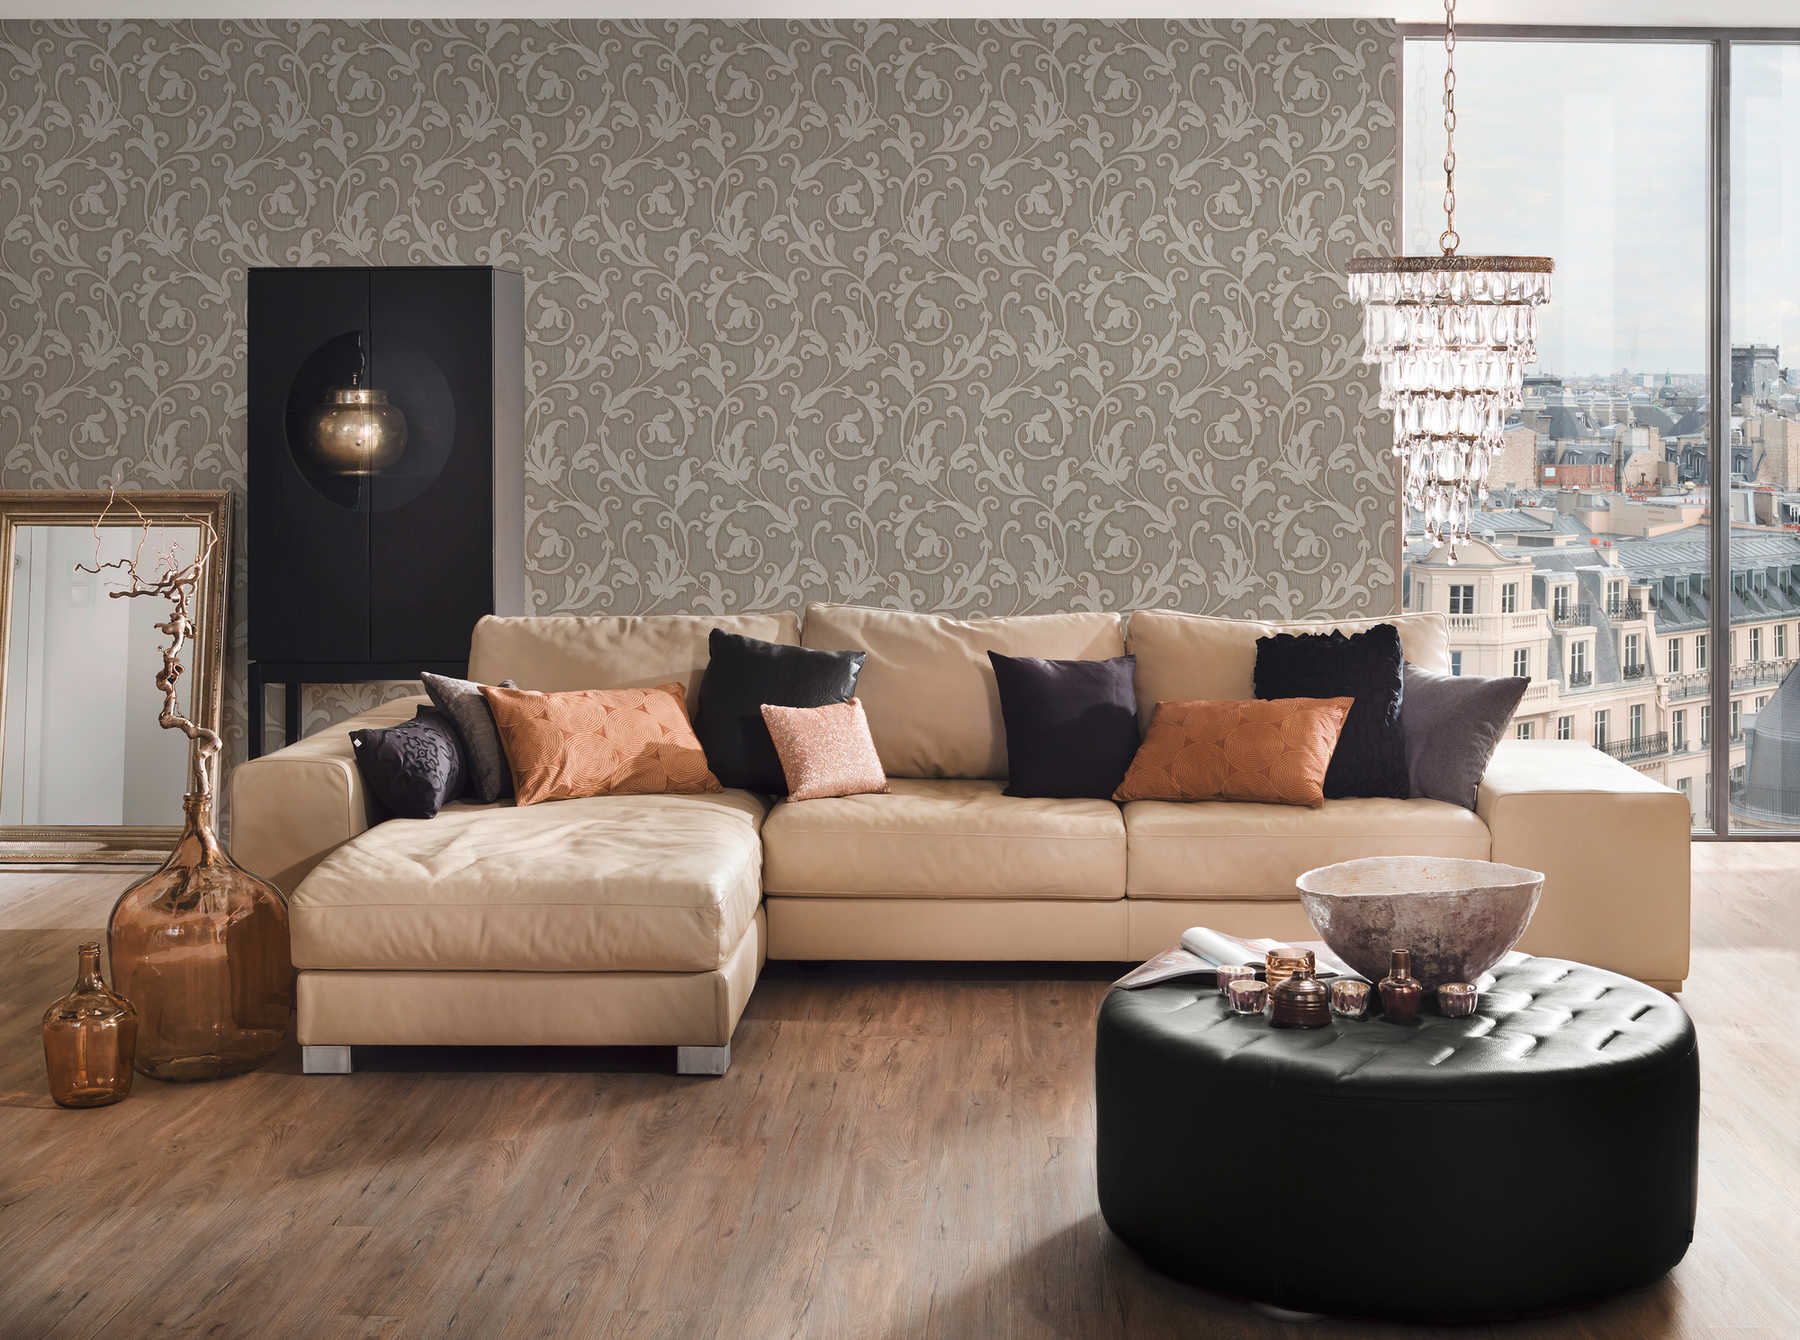             Premium ornament wallpaper with textile structure & embossed pattern - grey, brown
        